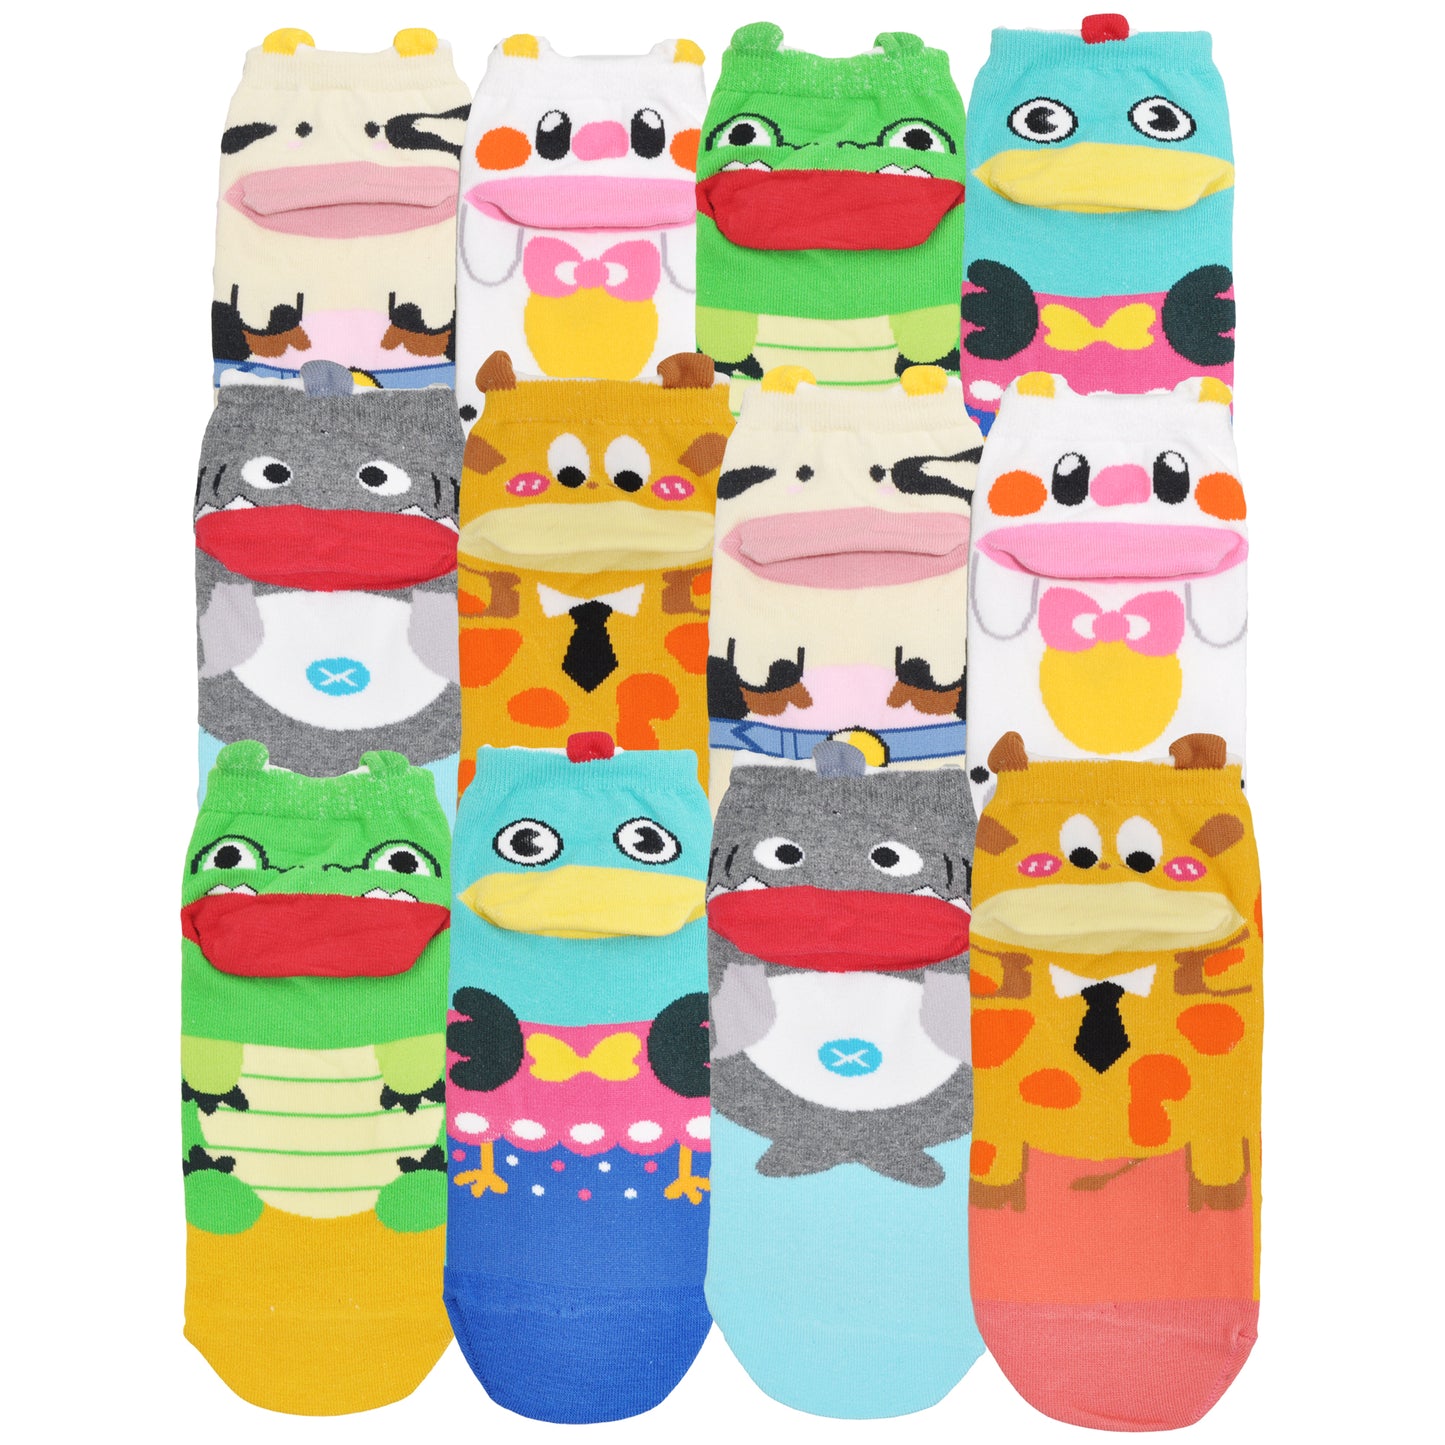 Cotton Ankle Socks With Animal Character Heel Design (6-Pairs)